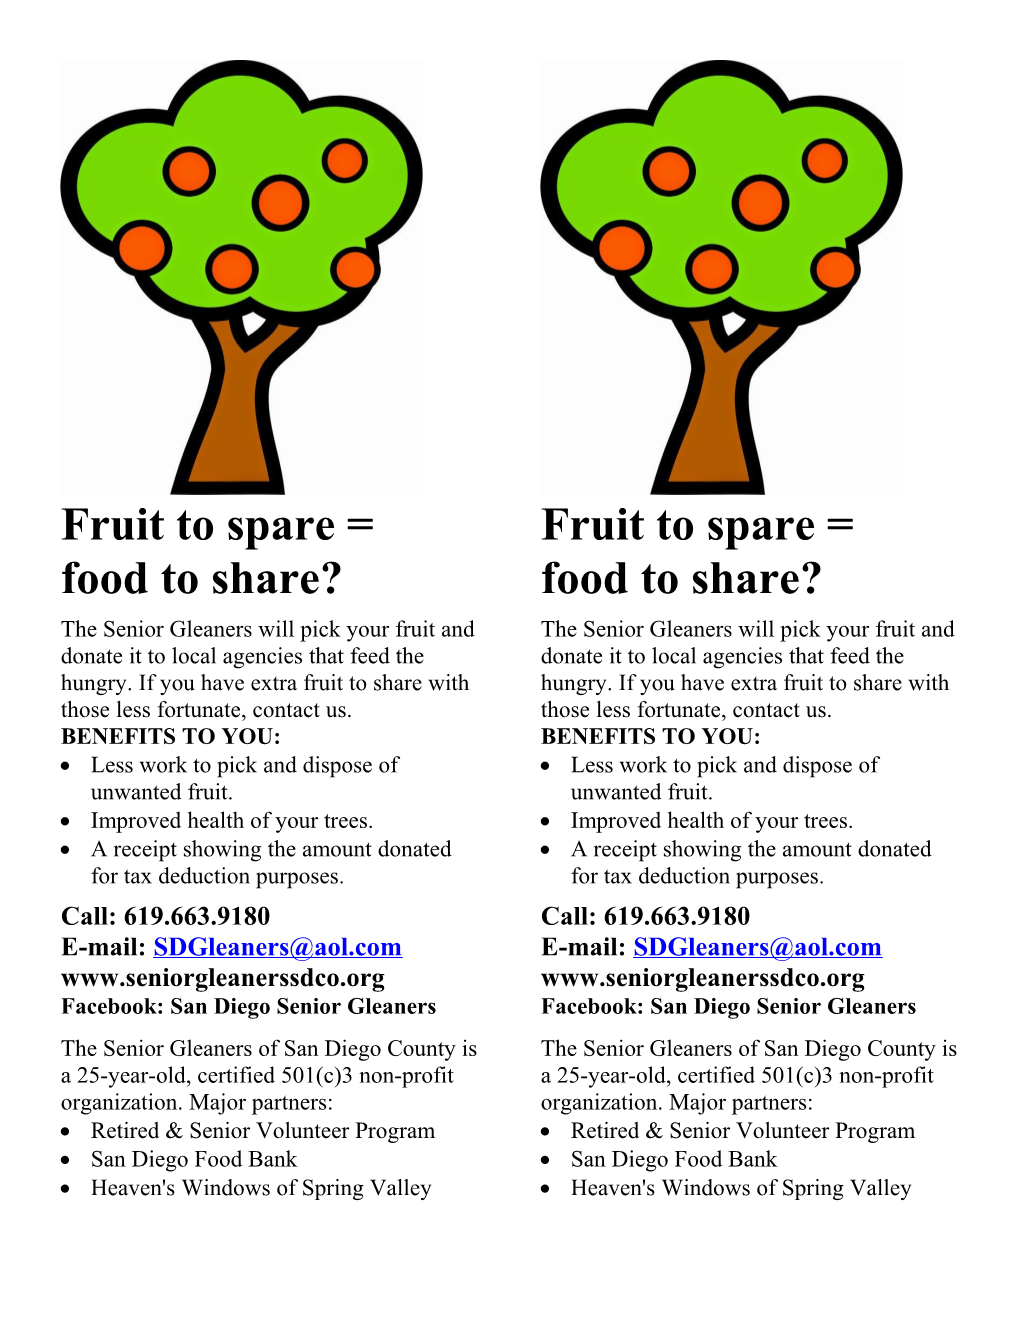 Less Work to Pick and Dispose of Unwanted Fruit